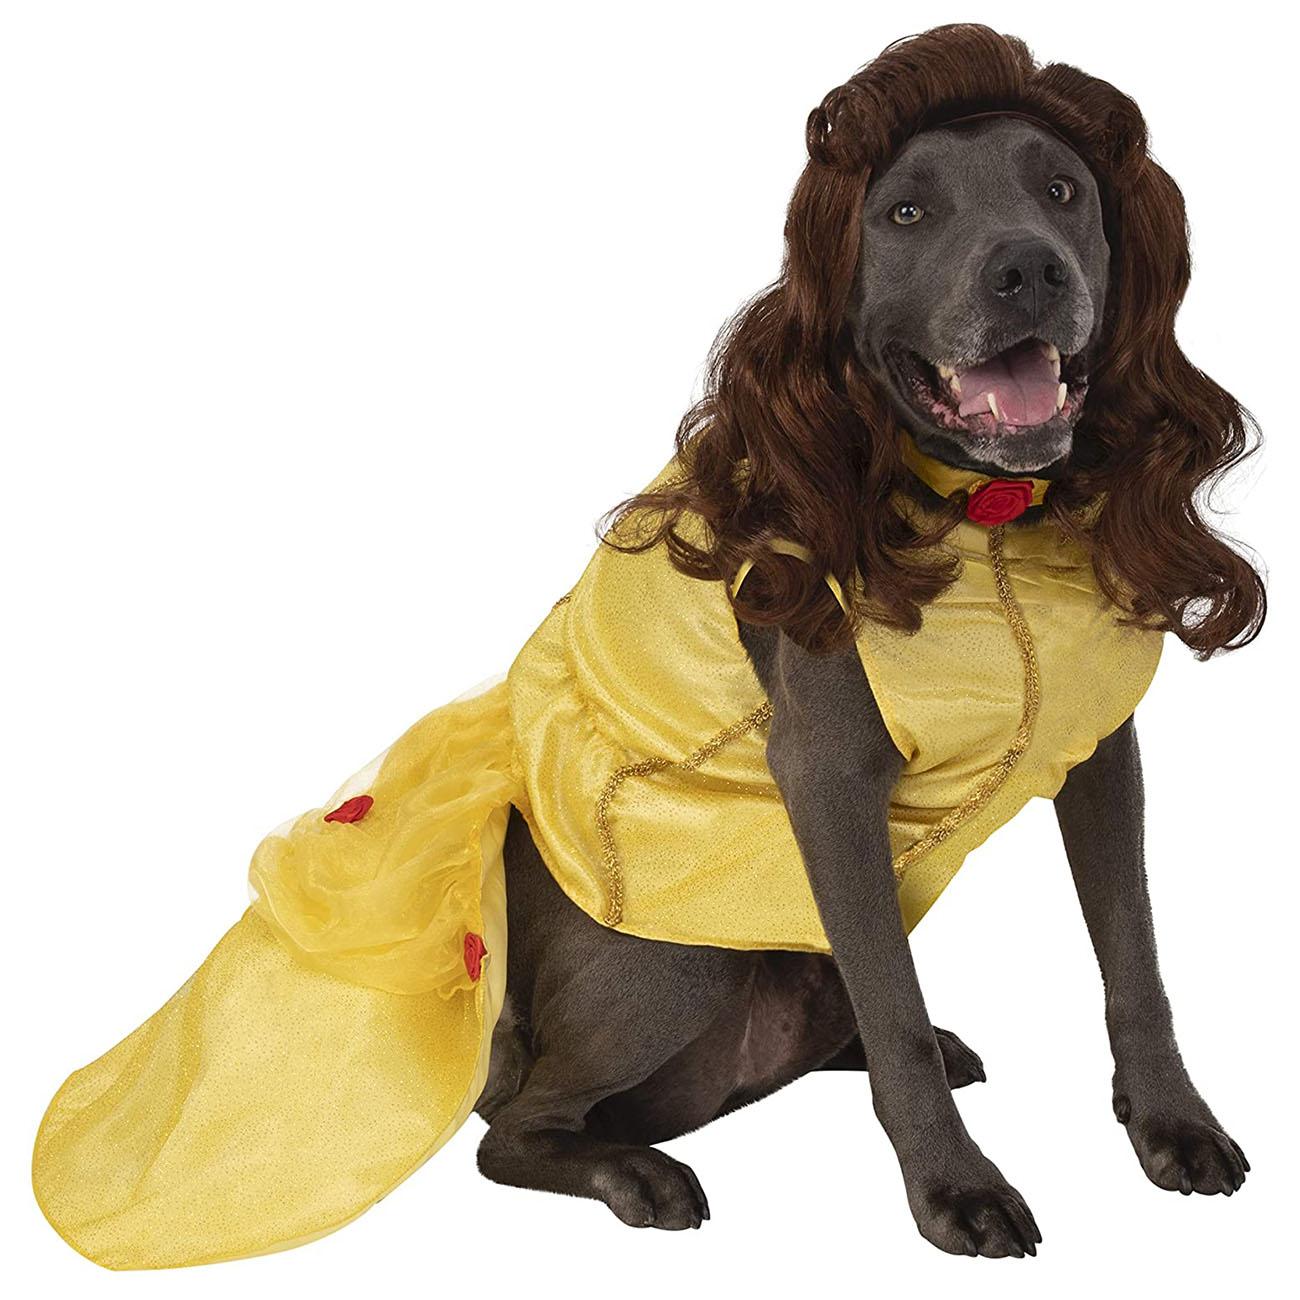 Disney's Big Dog Beauty and the Beast Belle D